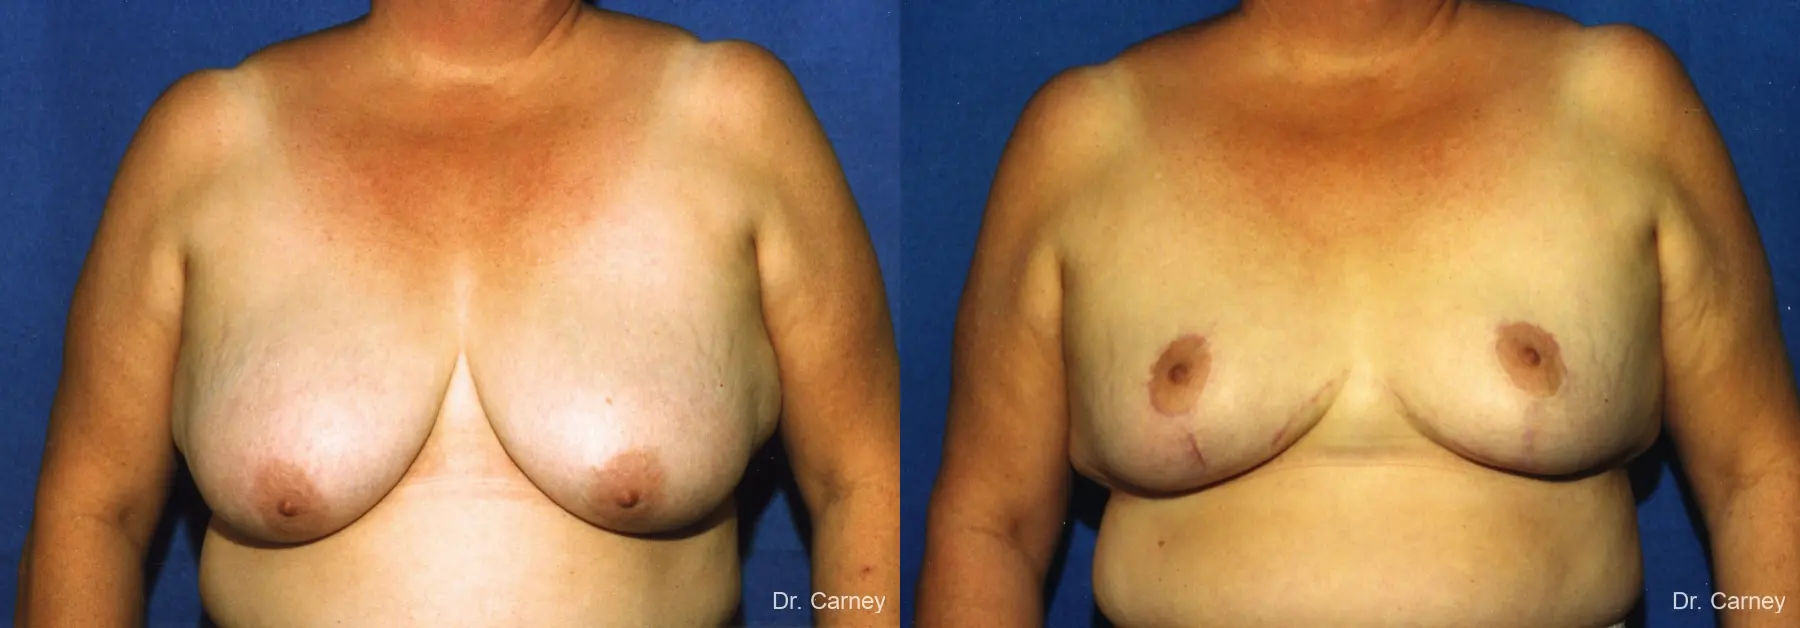 Virginia Beach Breast Lift 1186 - Before and After 1